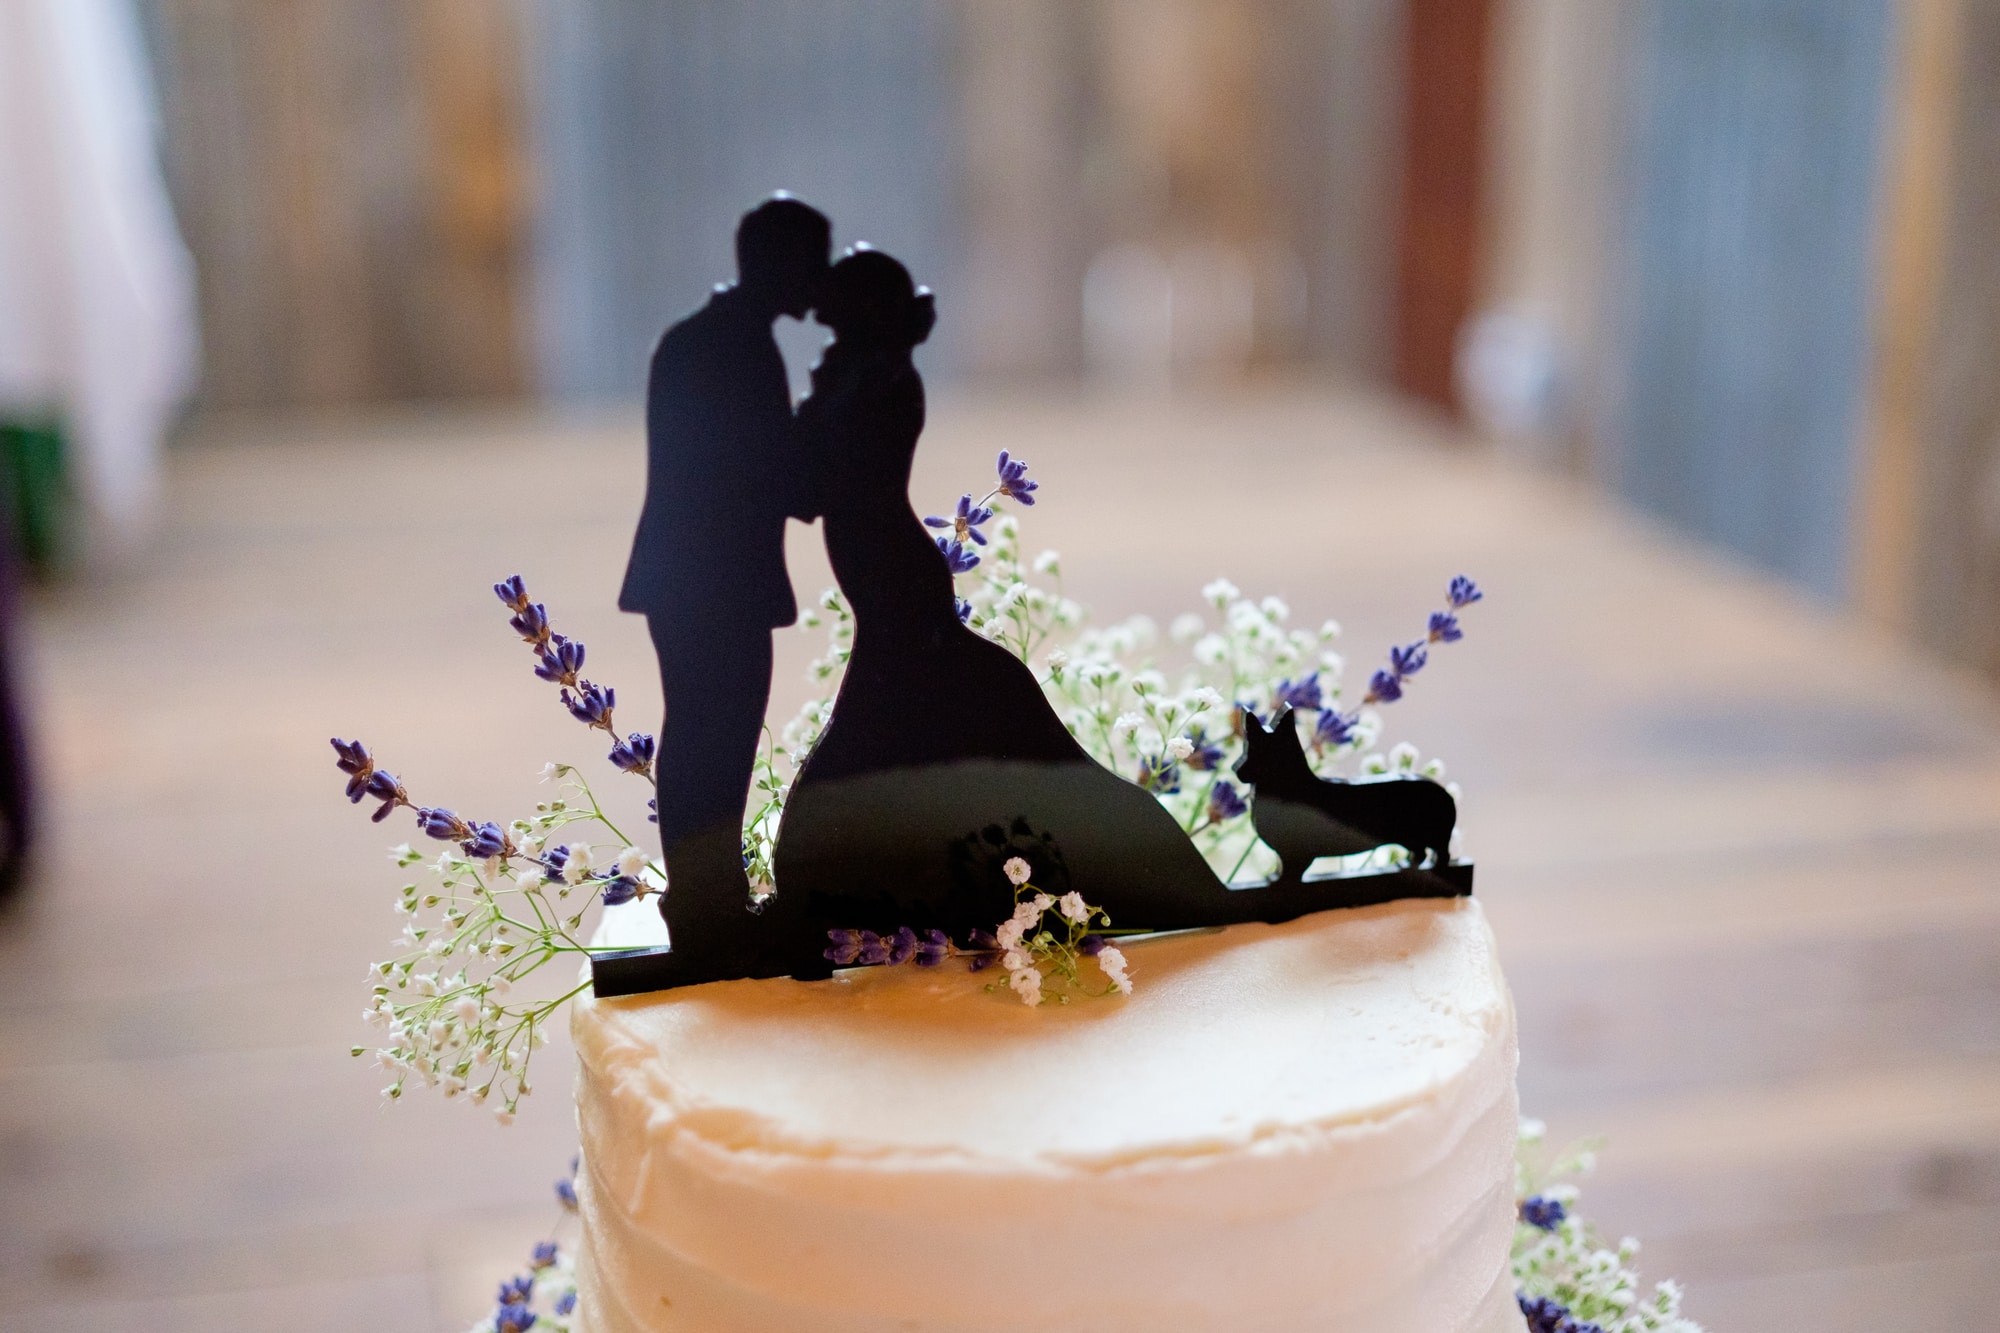 wedding cake topper in silhouette style of bride, groom, and dog